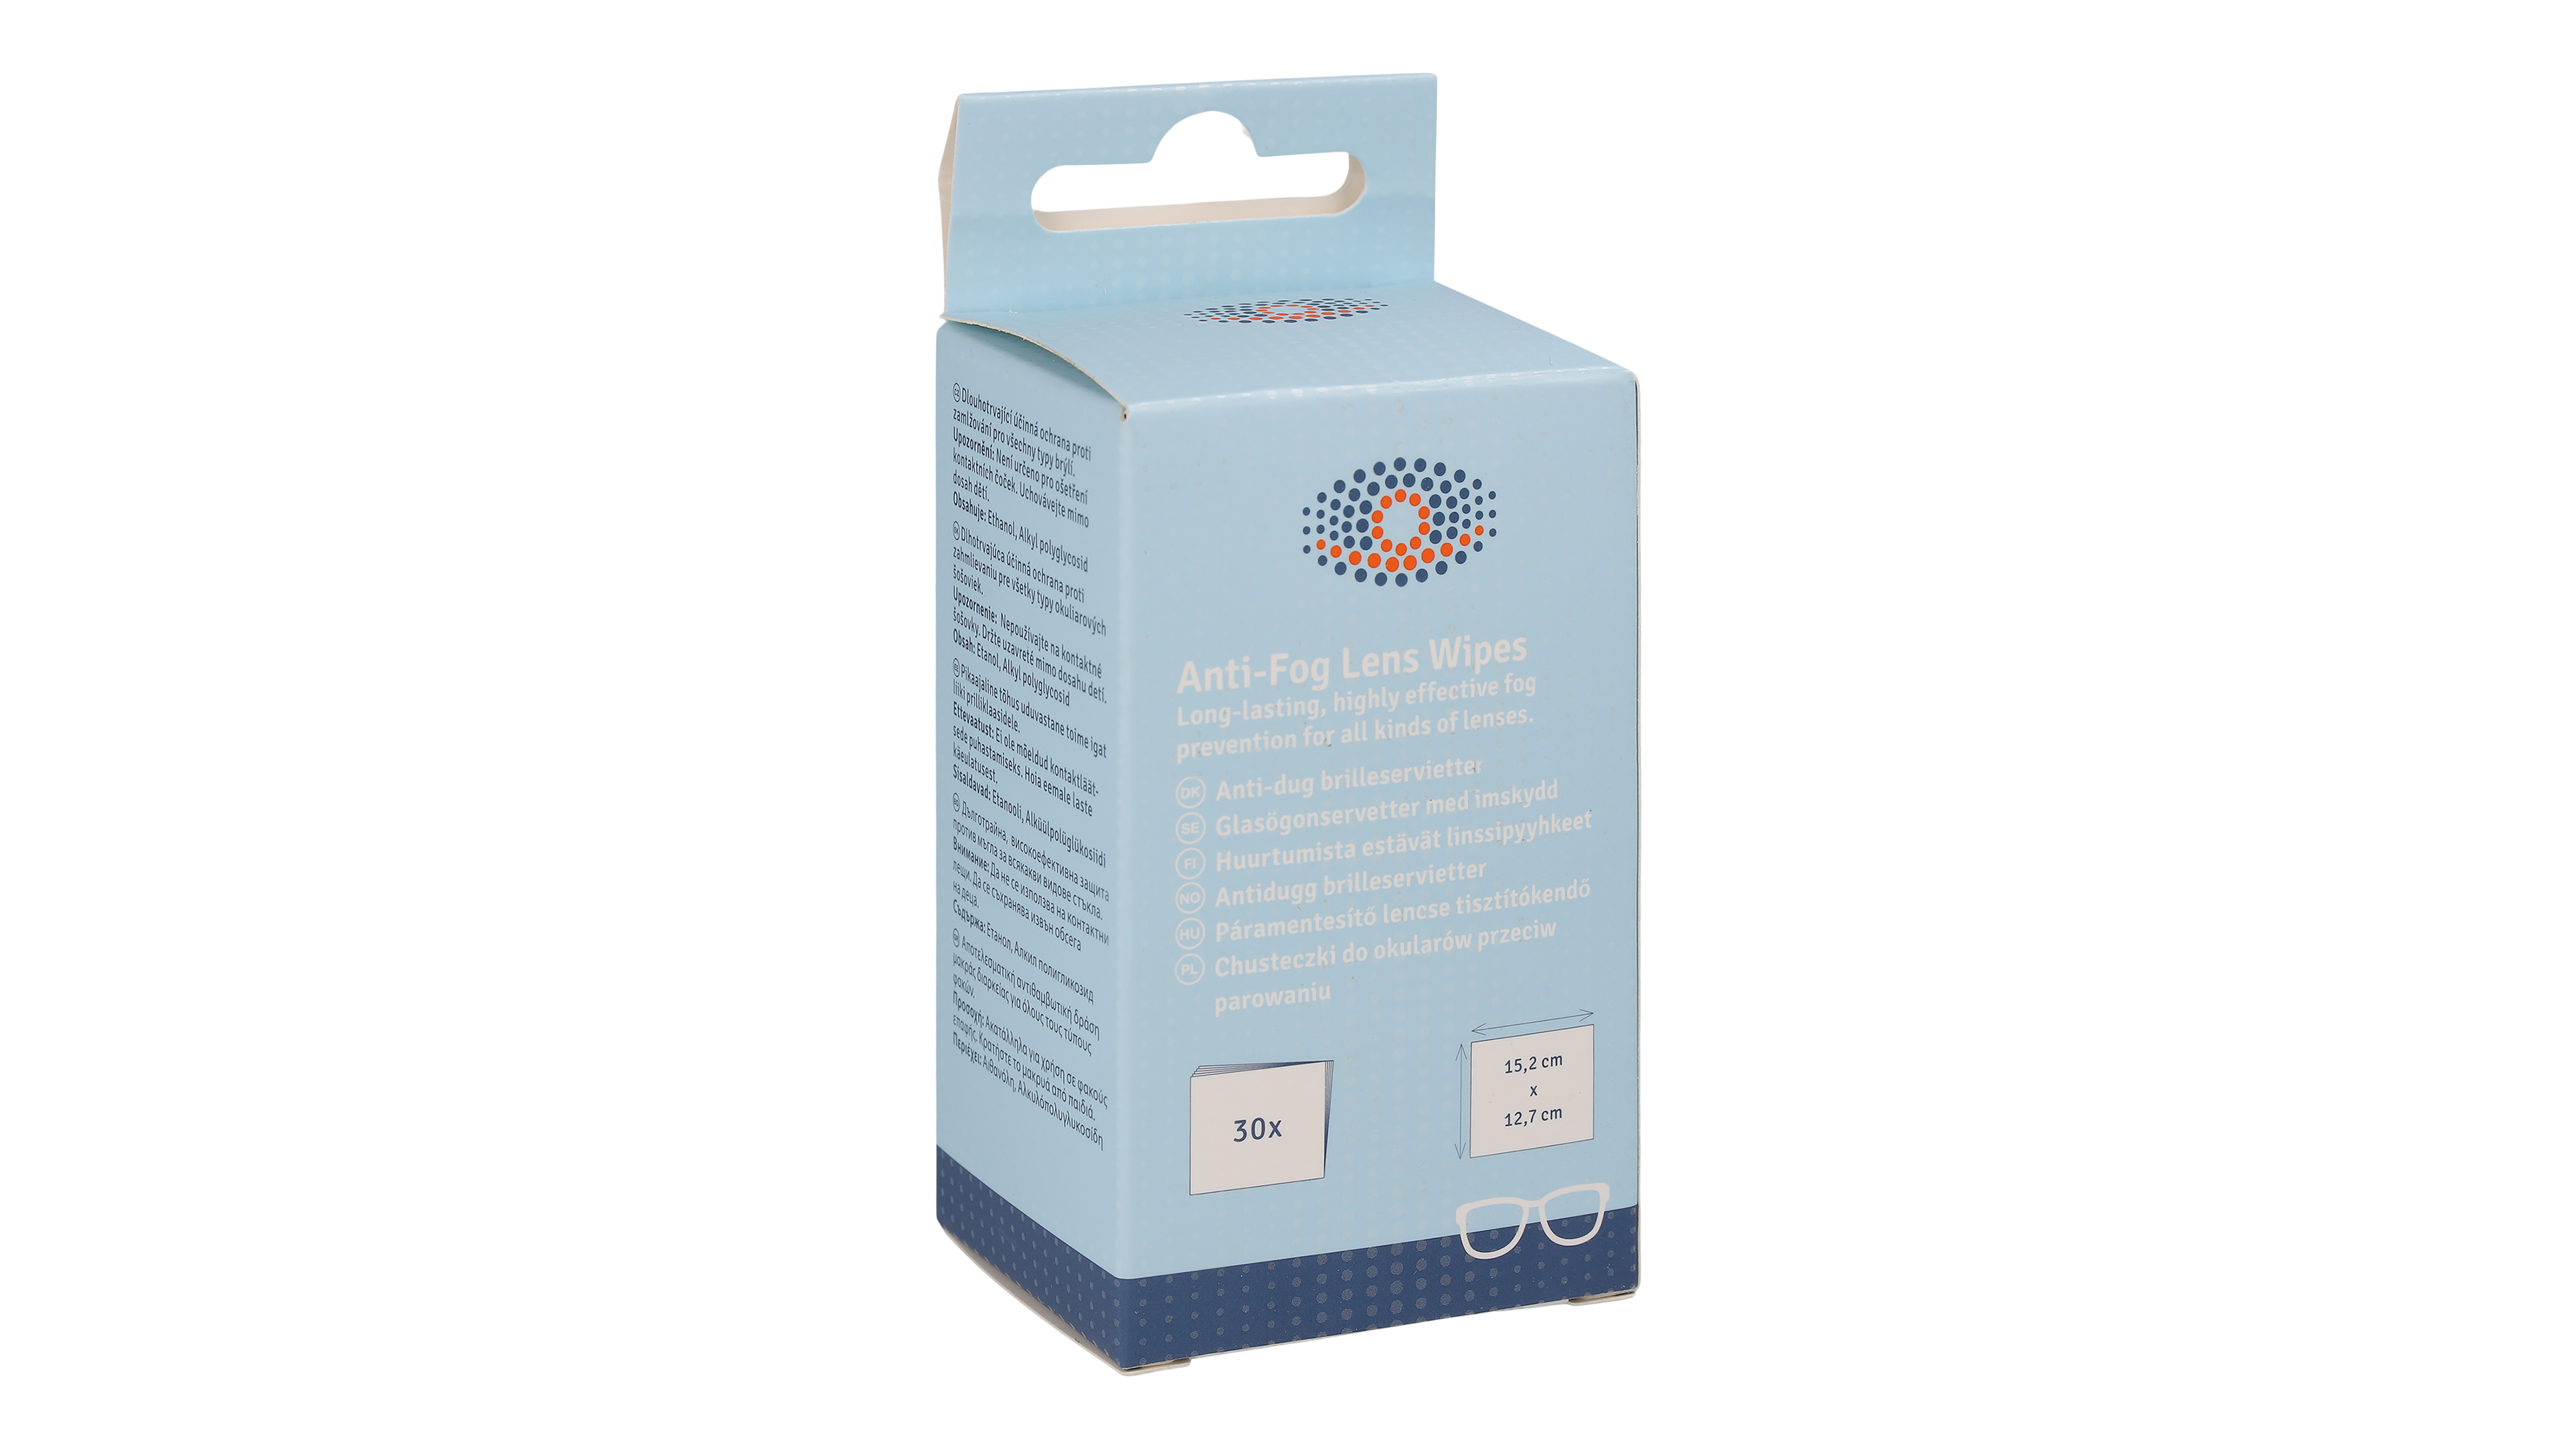 [products.image.angle_right01] Vision Express Anti-Fog Lens Wipes 30 Pack